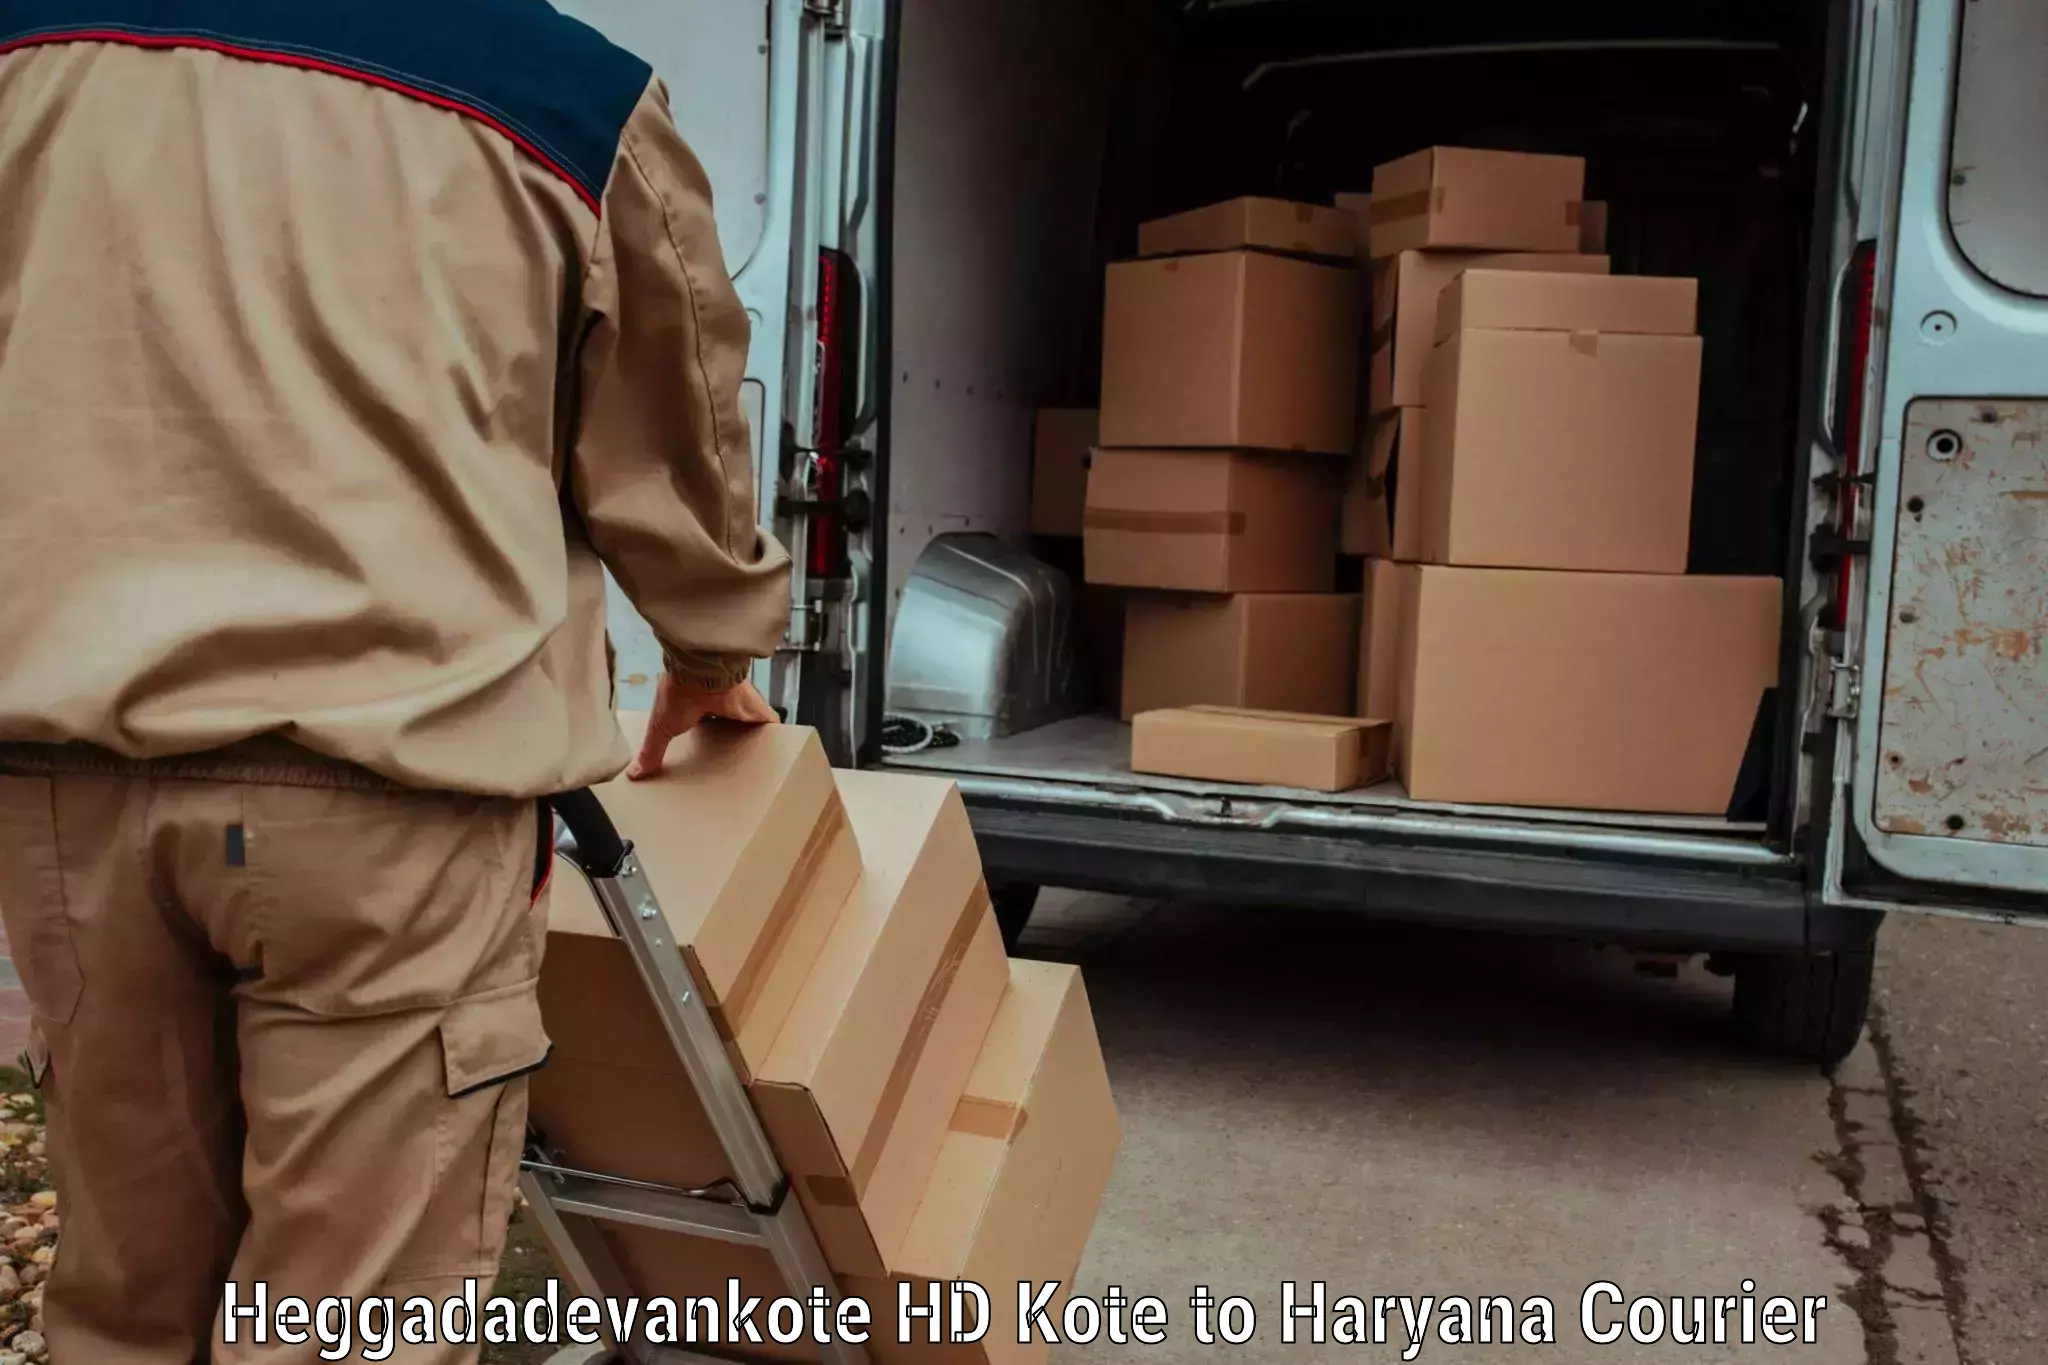 State-of-the-art courier technology in Heggadadevankote HD Kote to Budha Khera